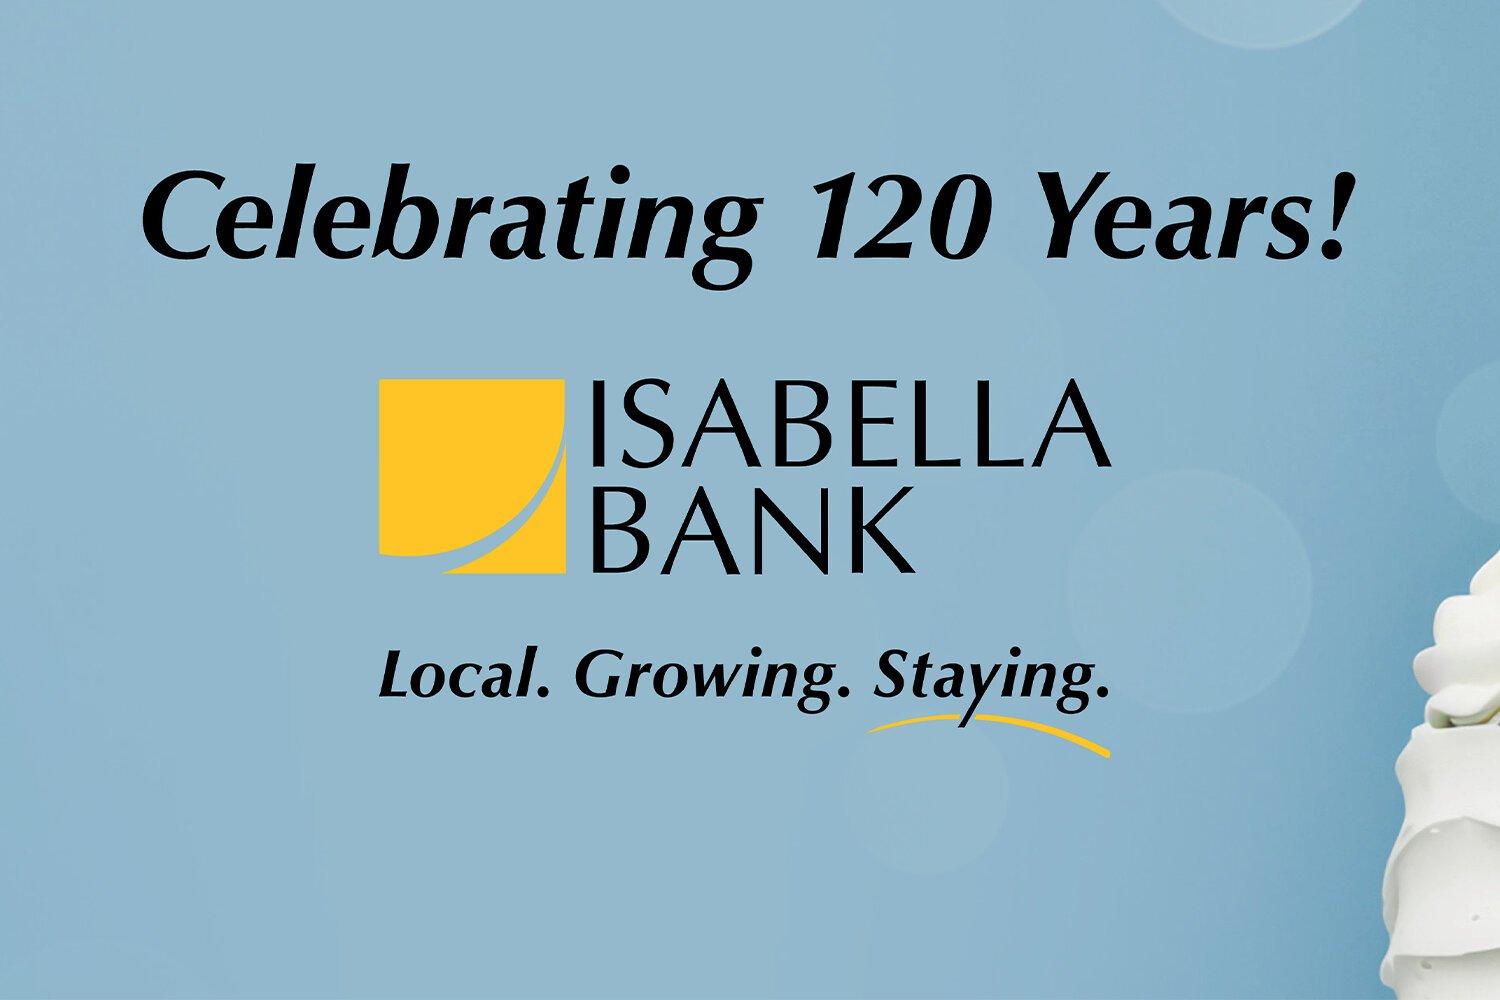 Isabella Bank celebrates 120 years of serving communities across the central Michigan region. 